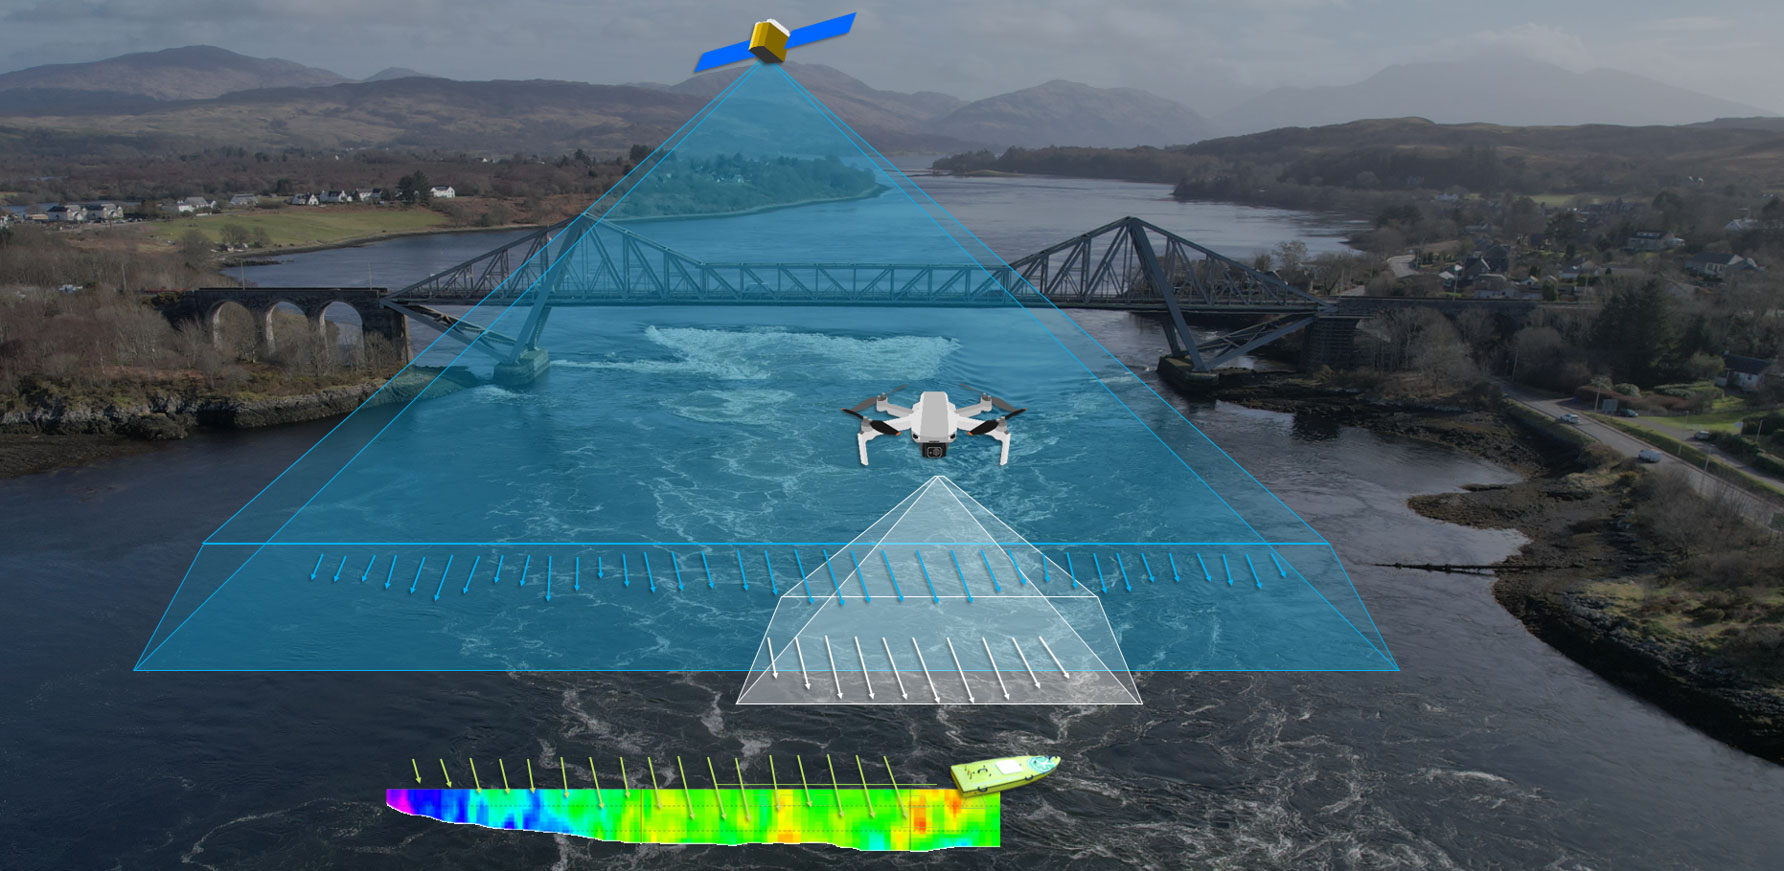 Drone view of bridge and river with added graphics showing how observations are obtained with the satellite, drone and acoustic sensor